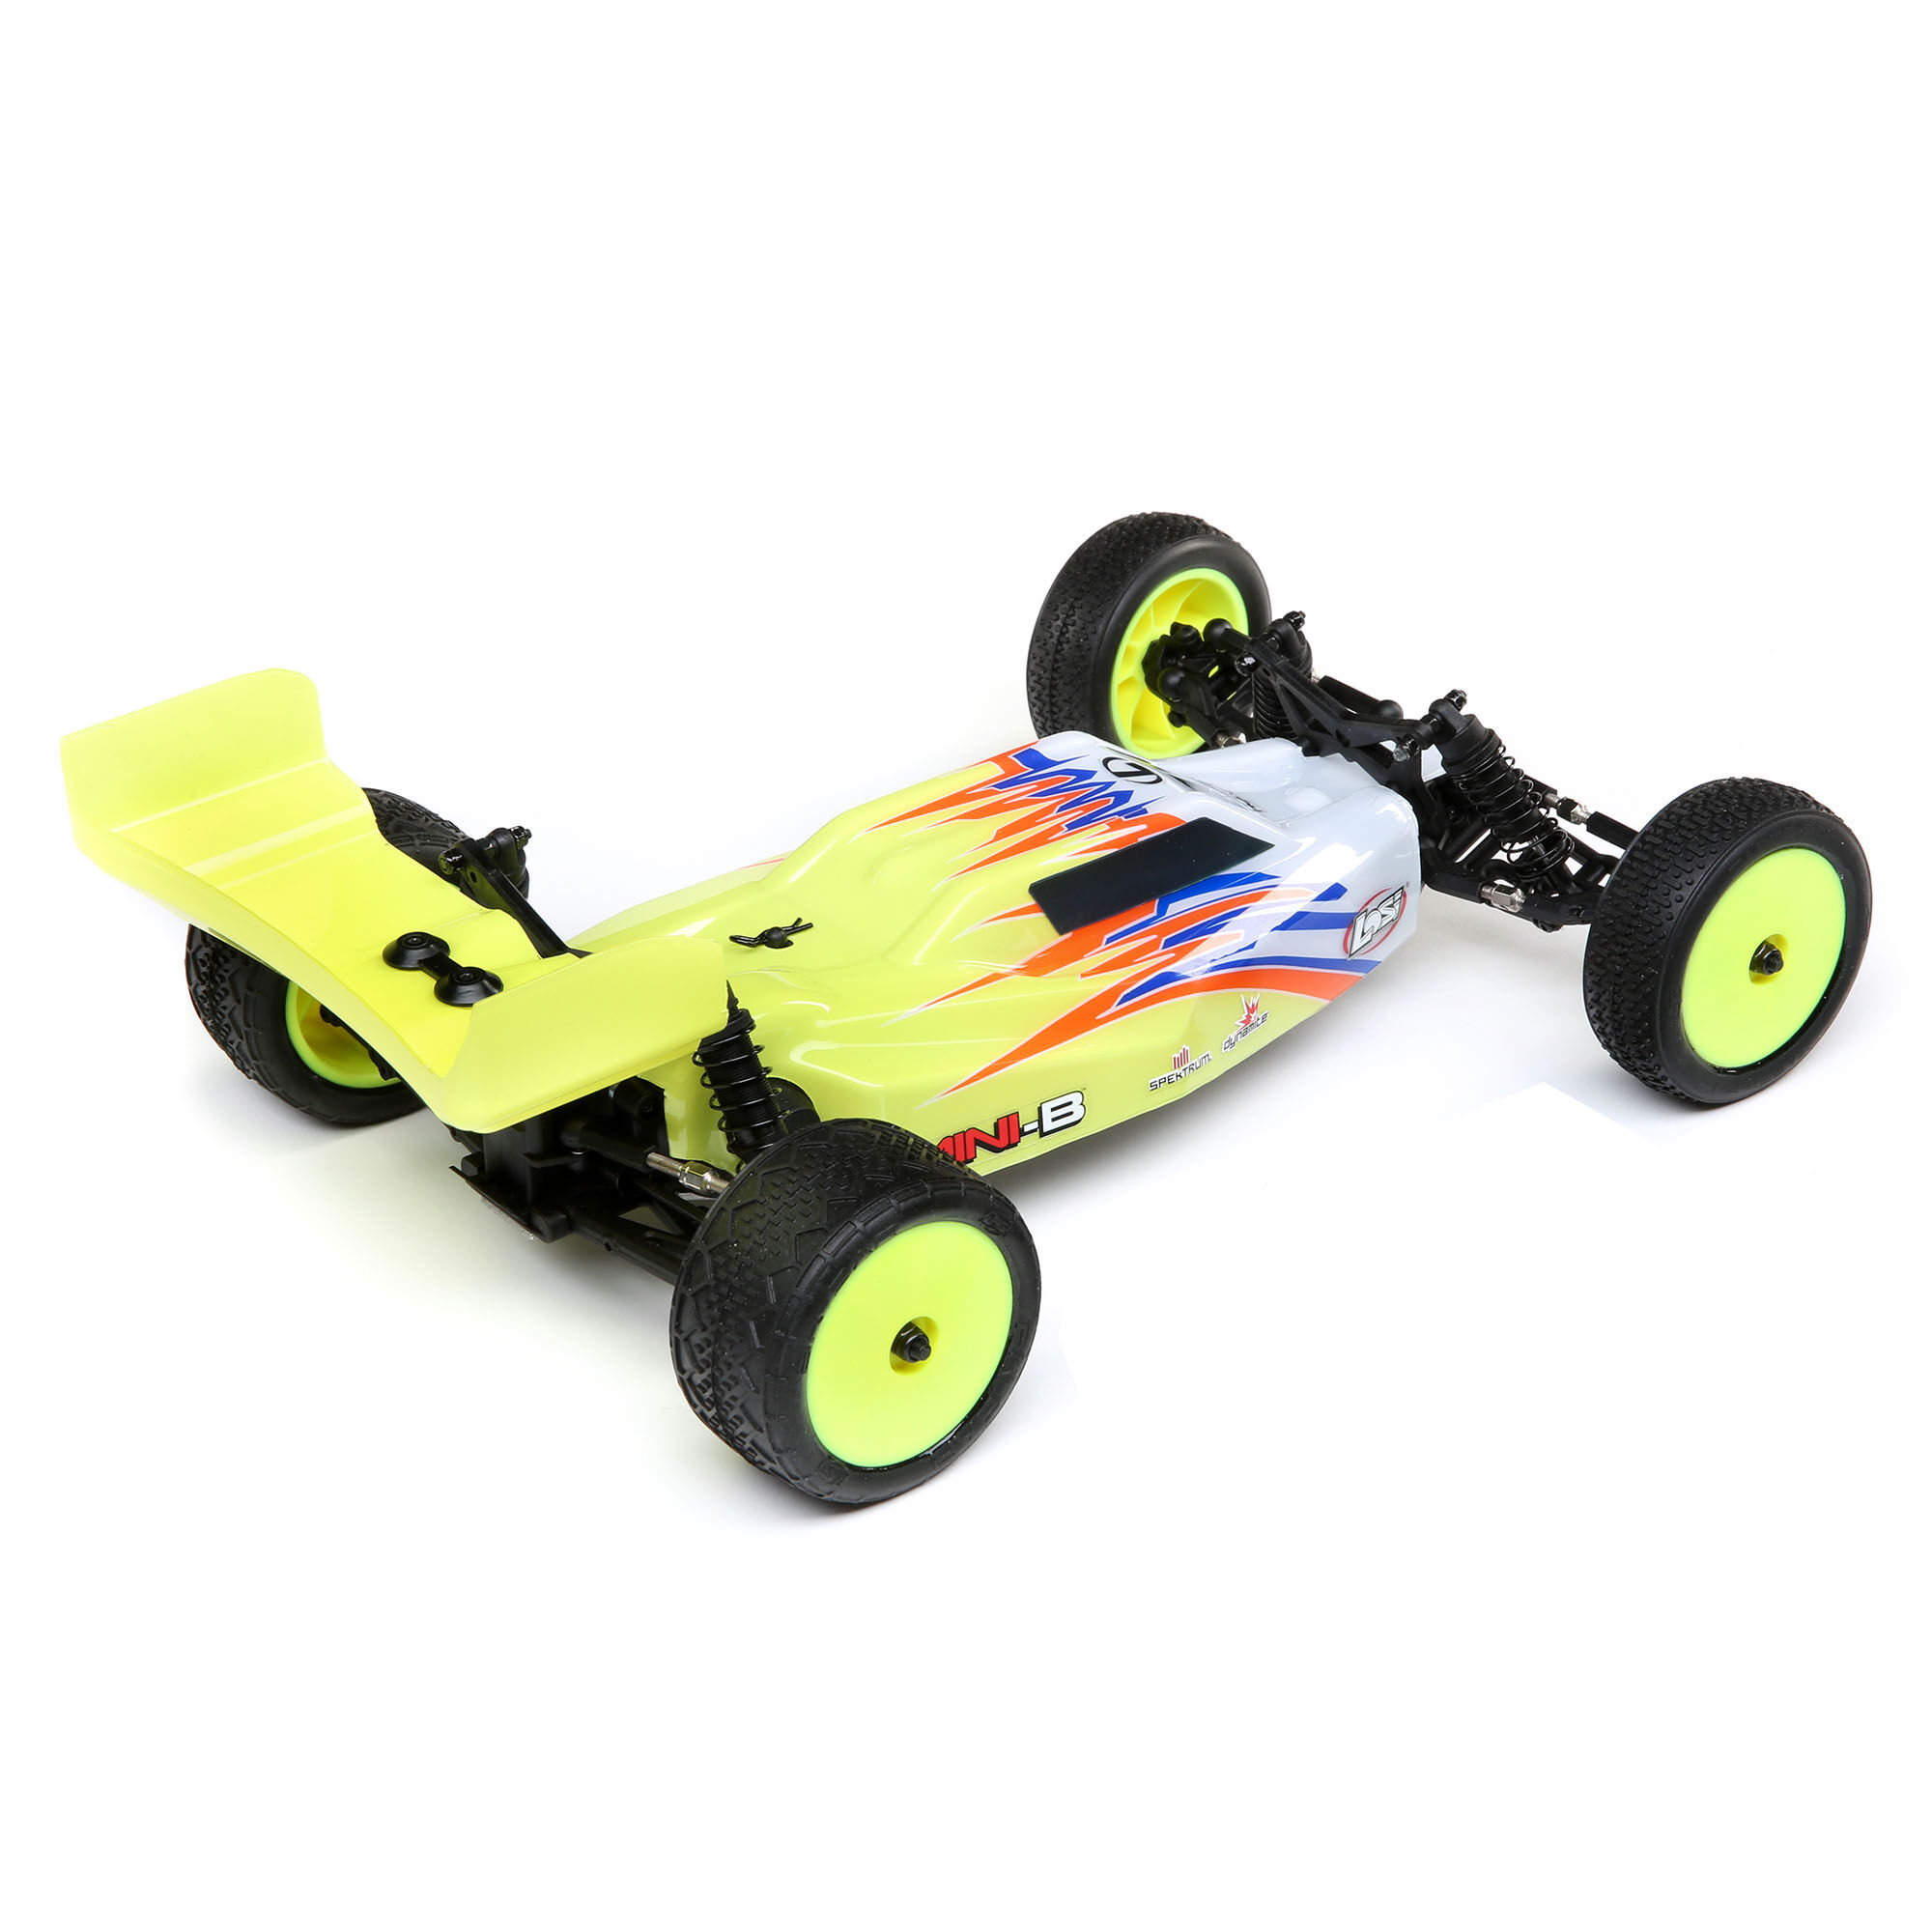 Losi LOS01016T3 1/16 Mini-b Brushed RTR 2wd Buggy Yellow for sale online